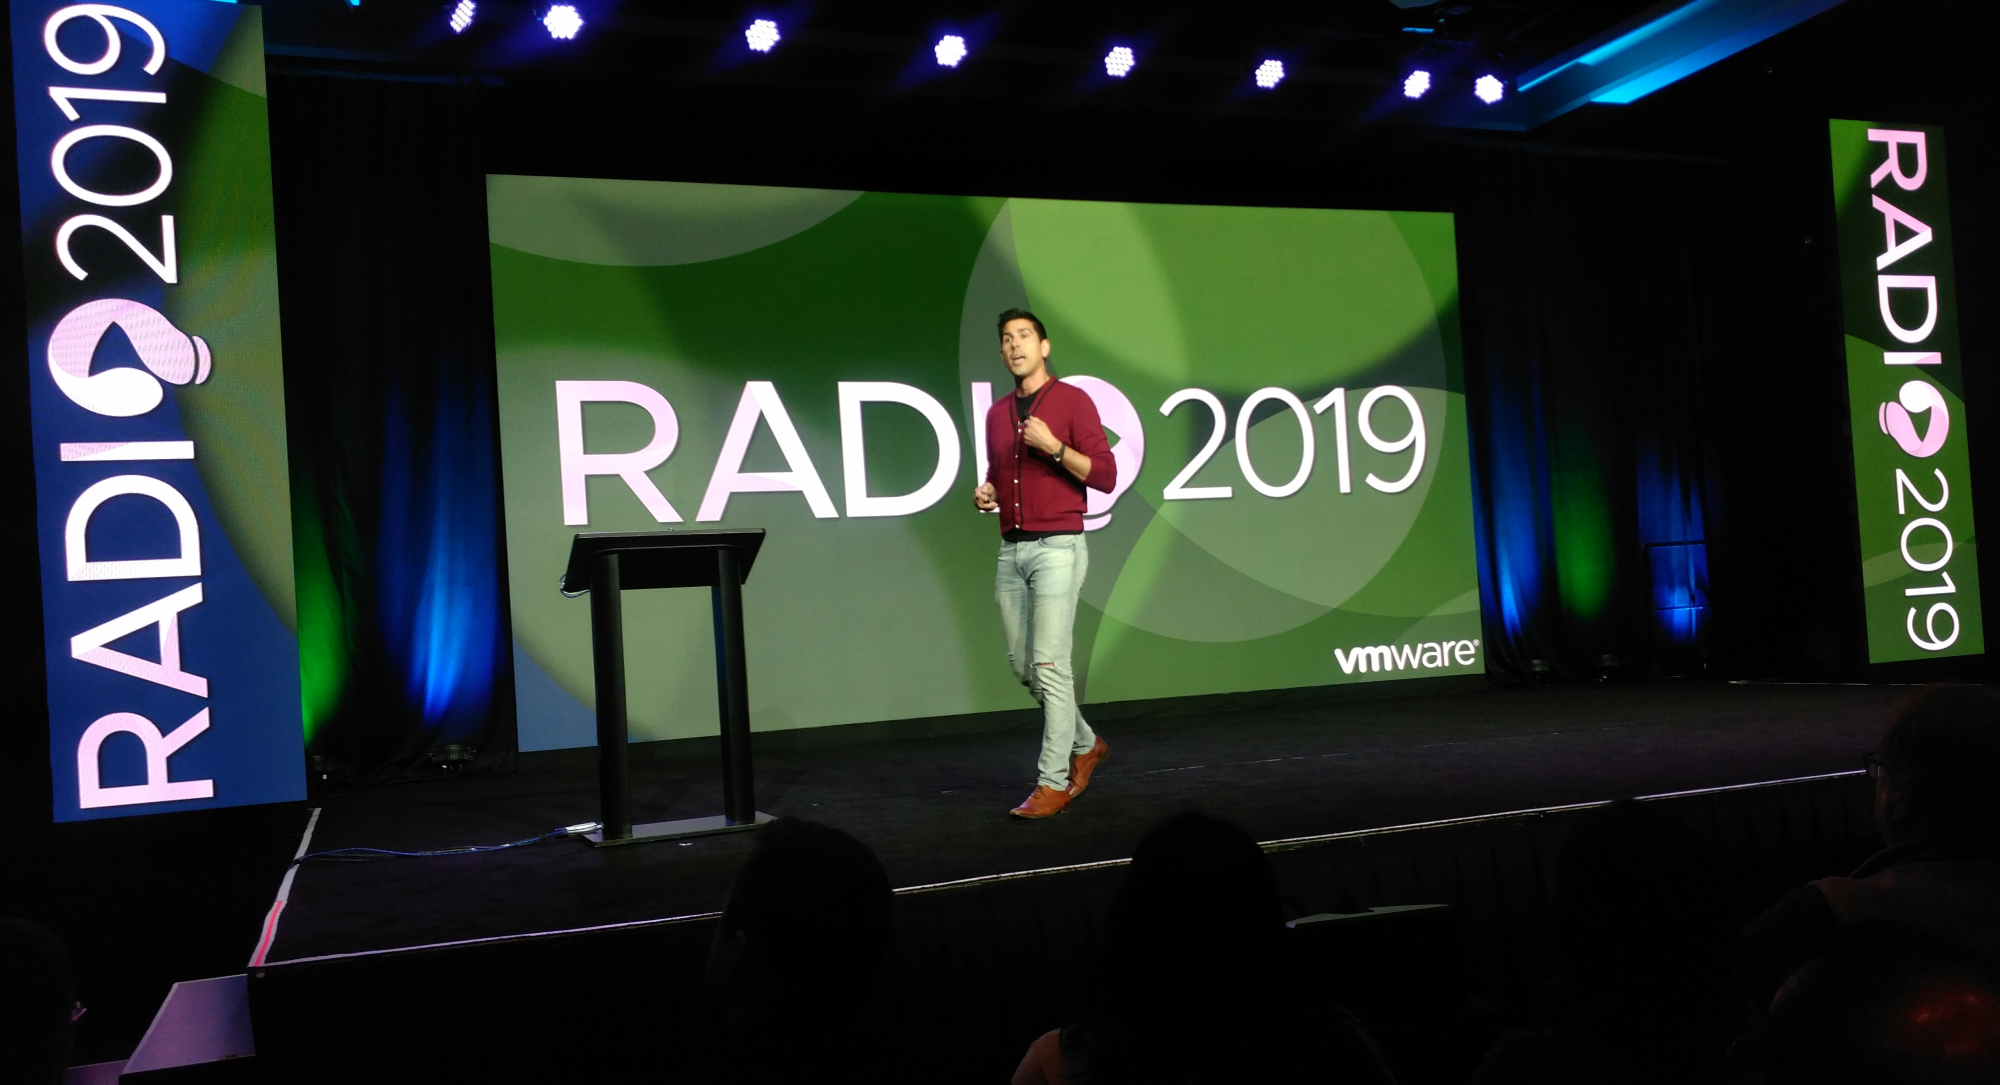 Kit Colbert, VMware VP and CTO of the company’s Cloud Platform business unit, speaking at Radio 2019, VMware's annual R&D conference.